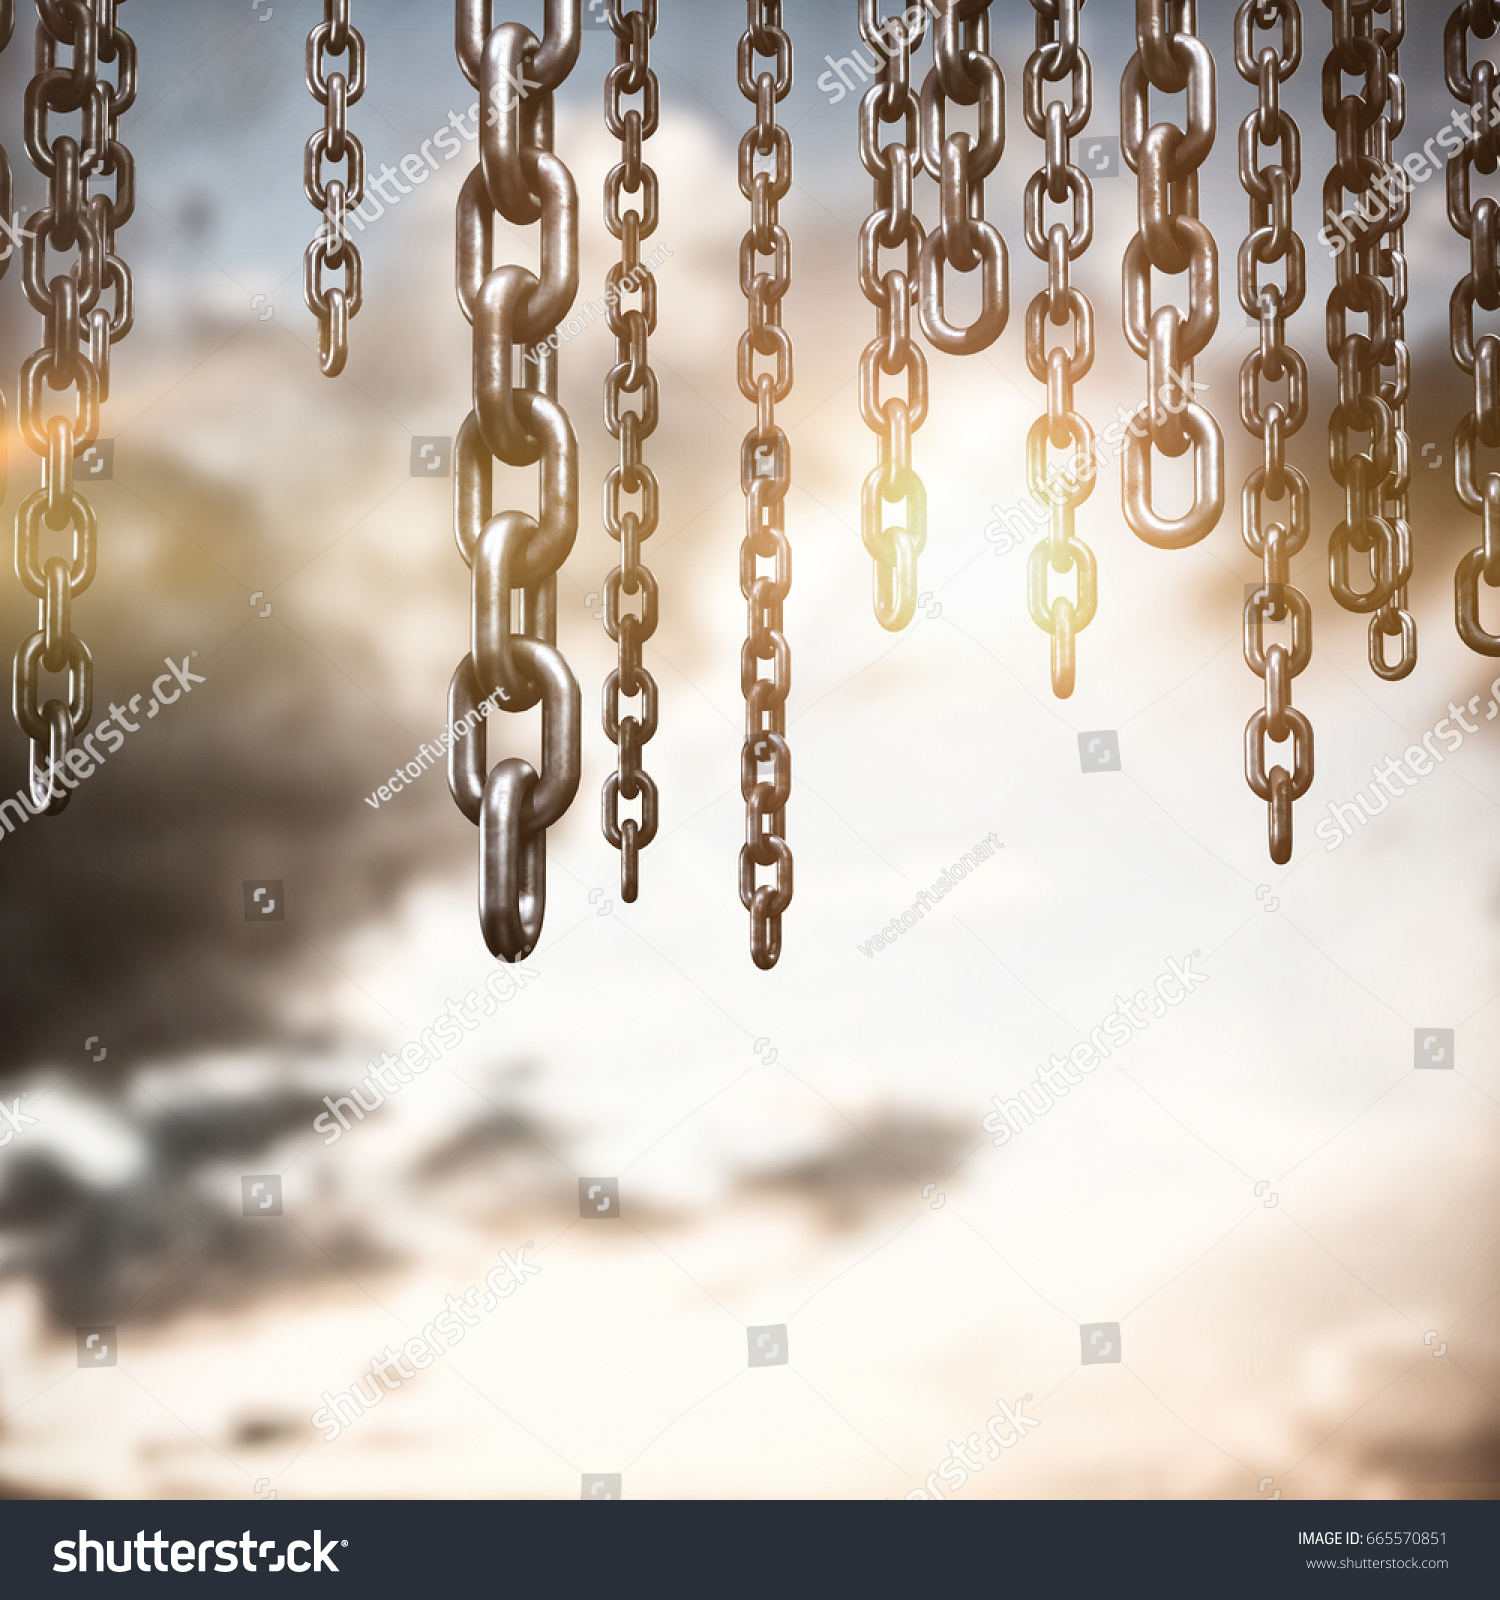 3d image of chains hanging against blue and orange sky with clouds #665570851